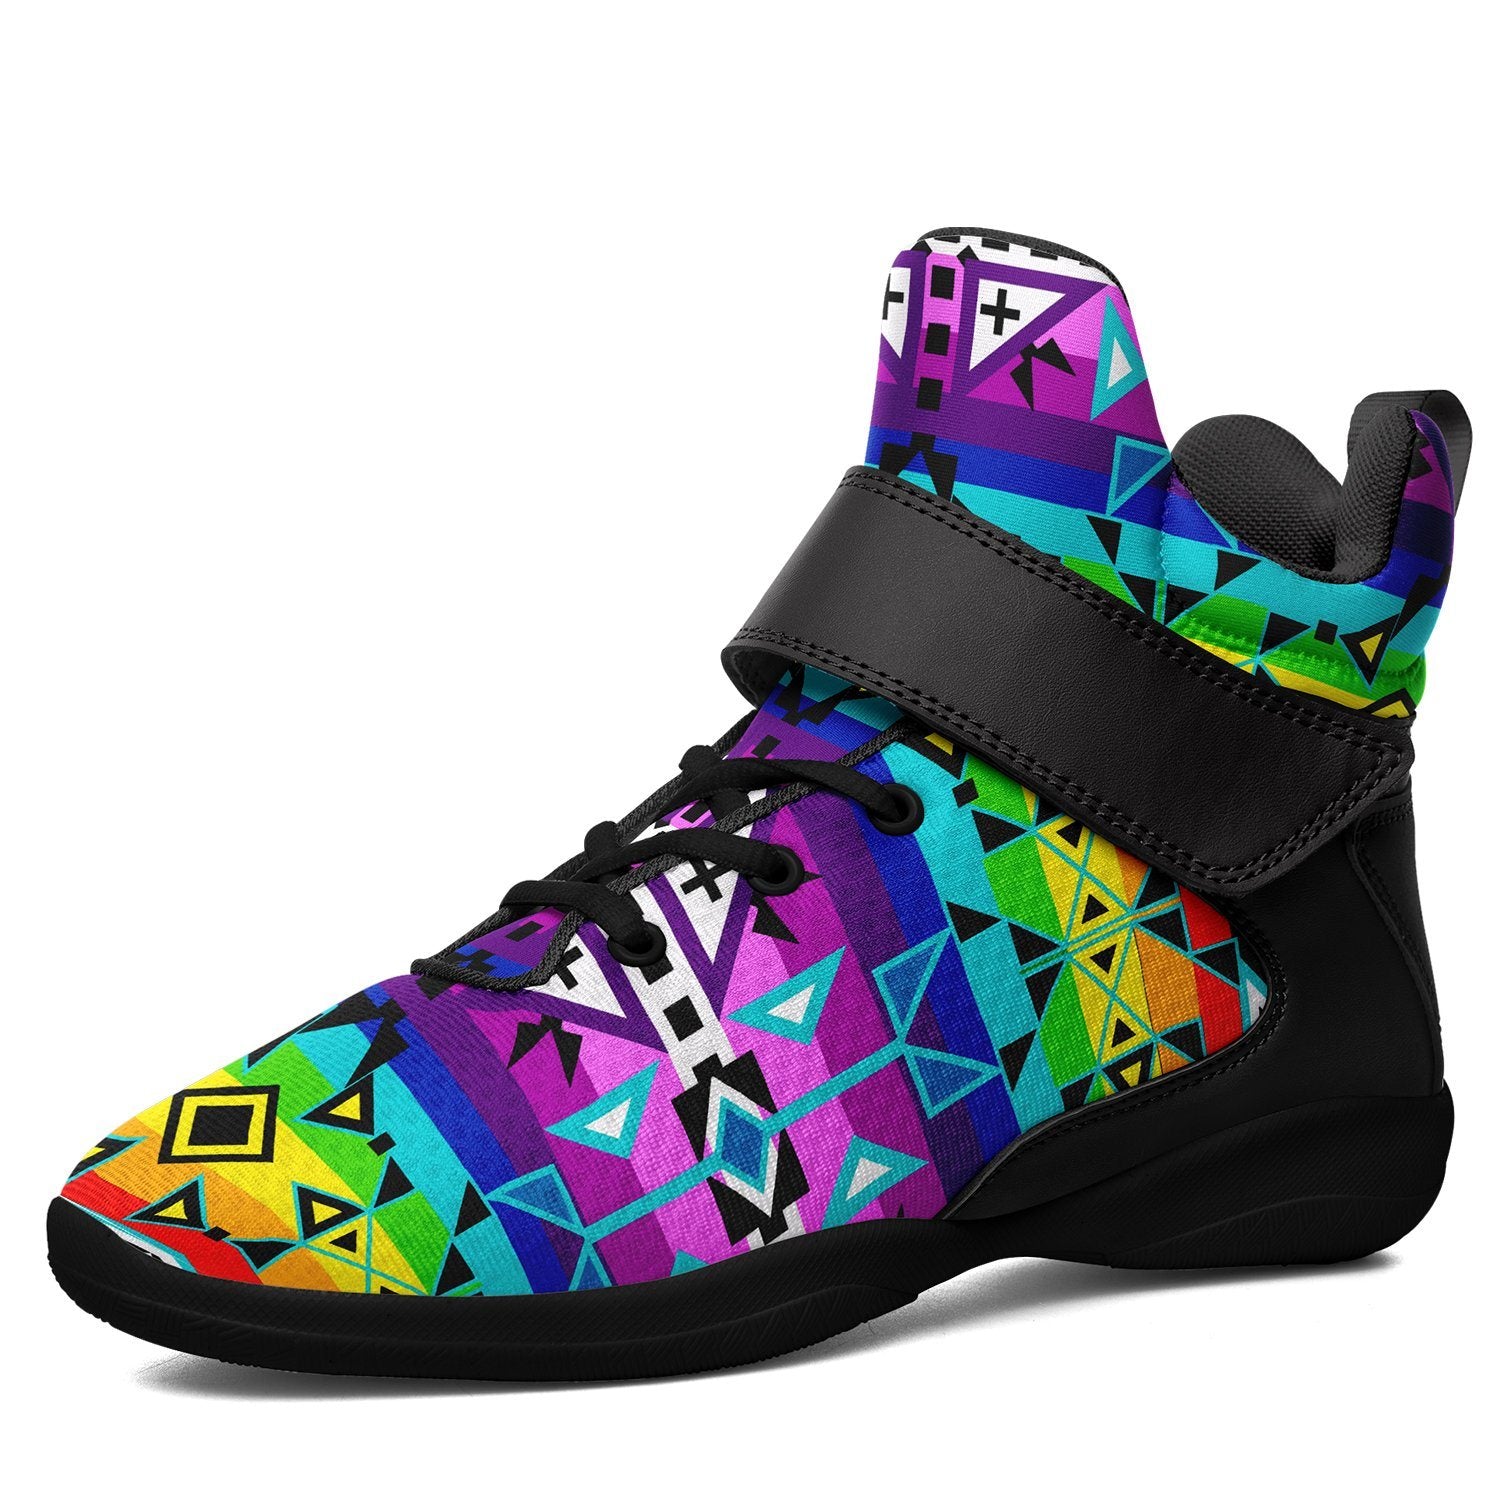 After the Rain Ipottaa Basketball / Sport High Top Shoes 49 Dzine US Women 4.5 / US Youth 3.5 / EUR 35 Black Sole with Black Strap 